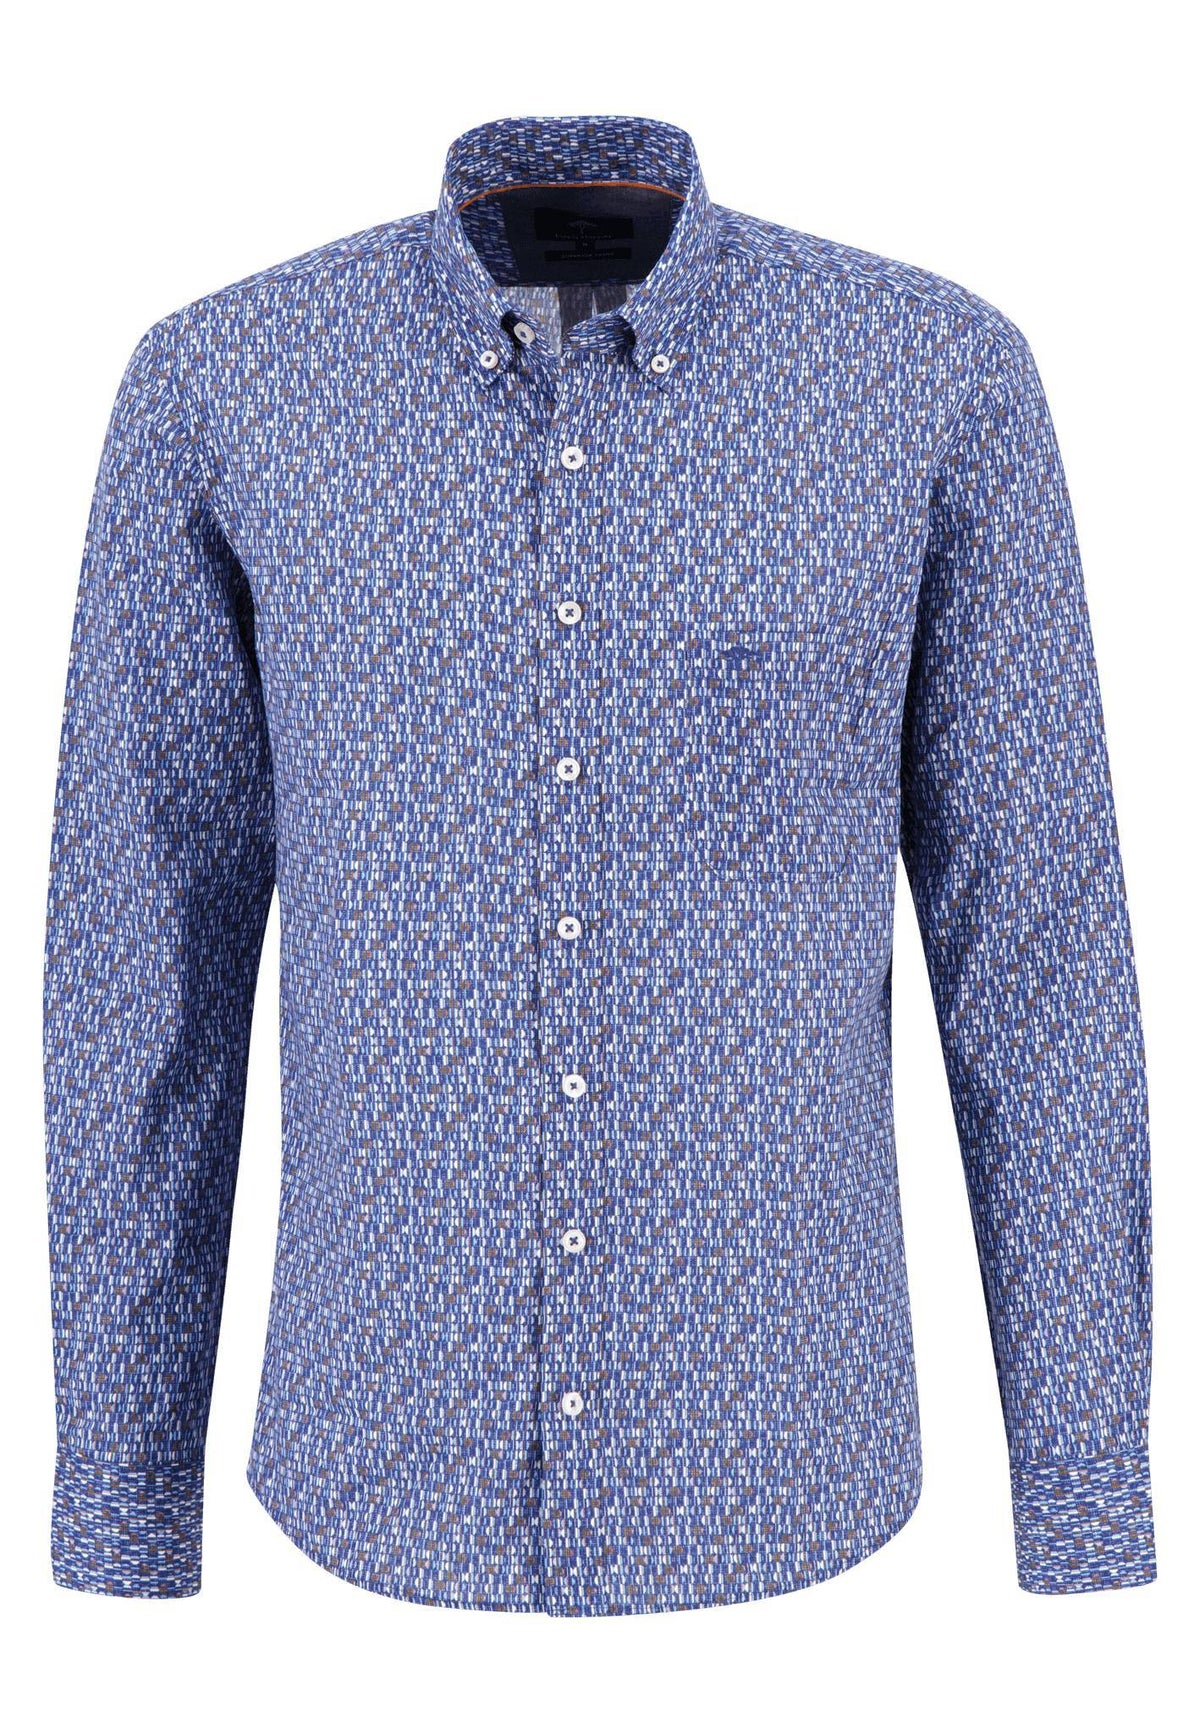 Fynch Hatton Patterned Long Sleeve Shirt With Button Down Collar